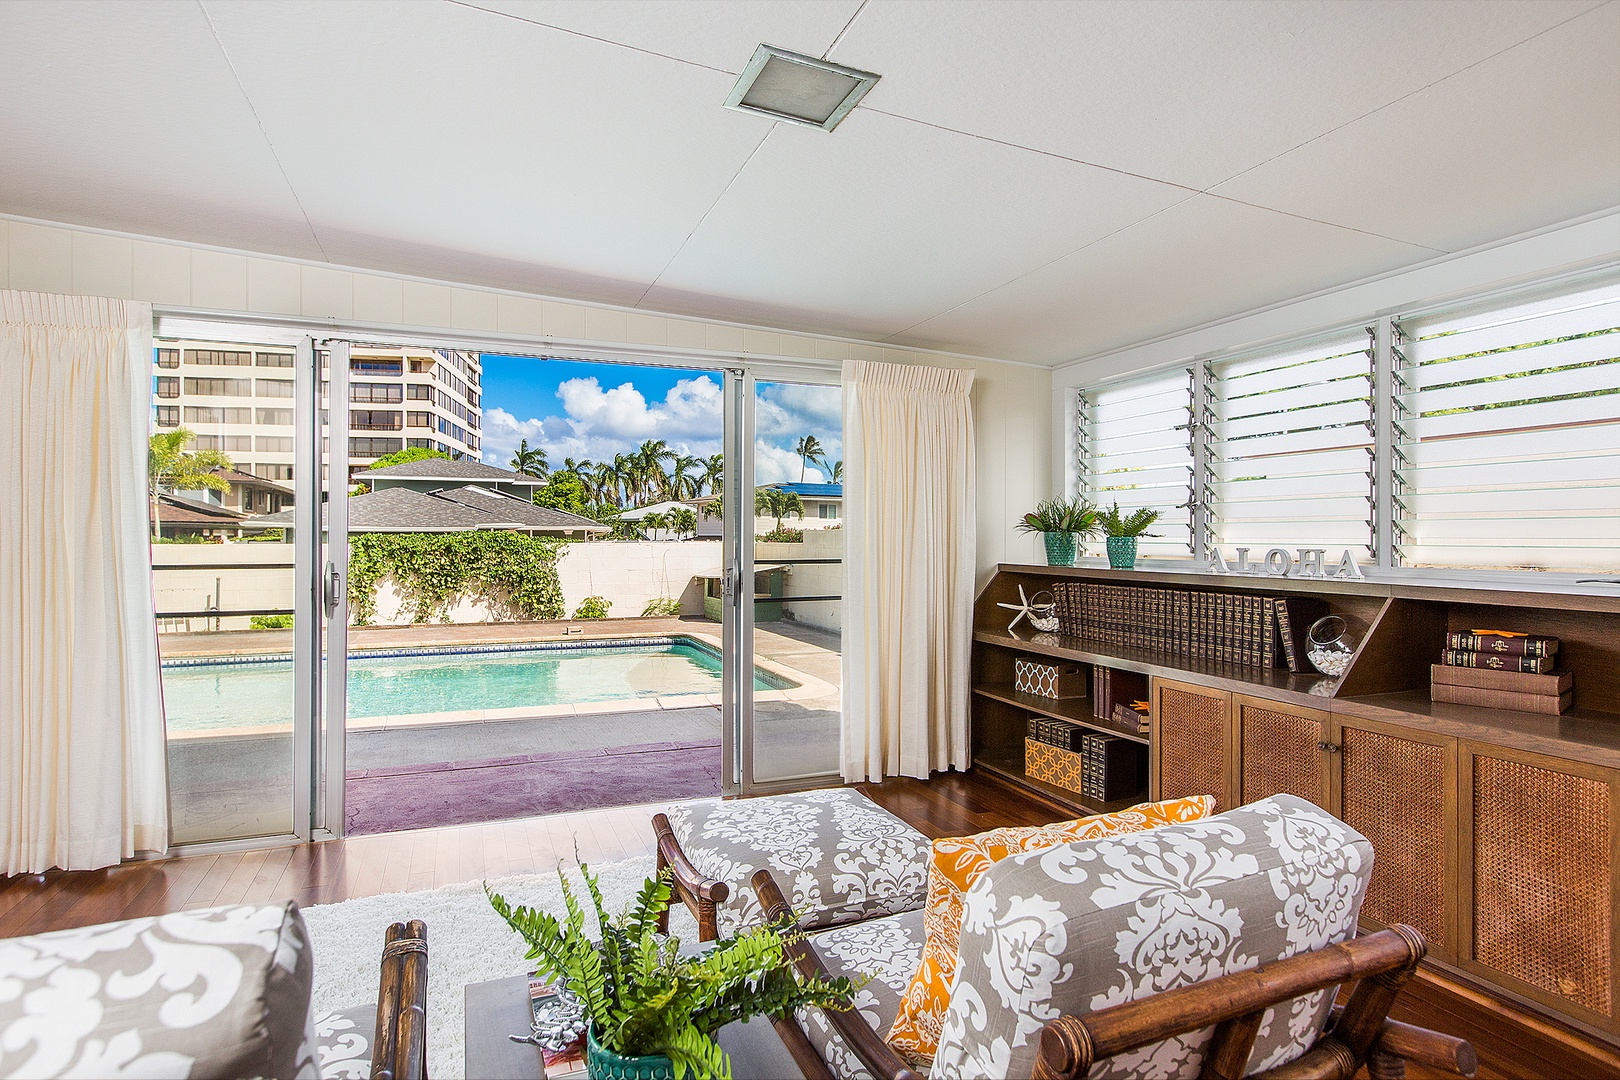 Honolulu Vacation Rentals, Kahala Cottage - The view from the primary